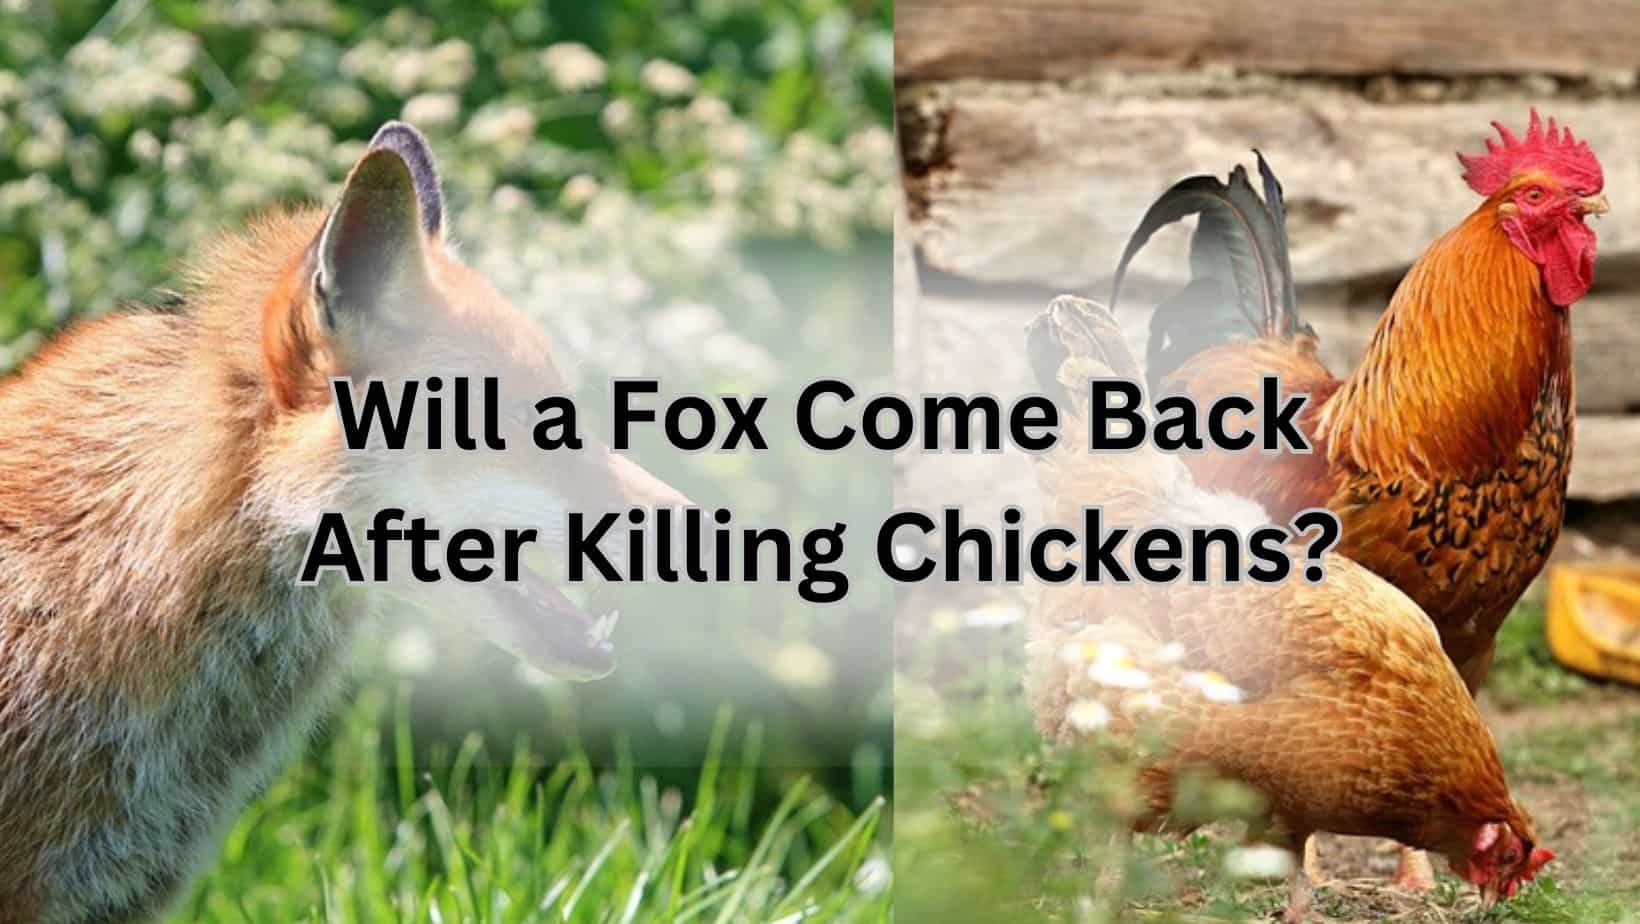 Will a Fox Come Back After Killing Chickens?